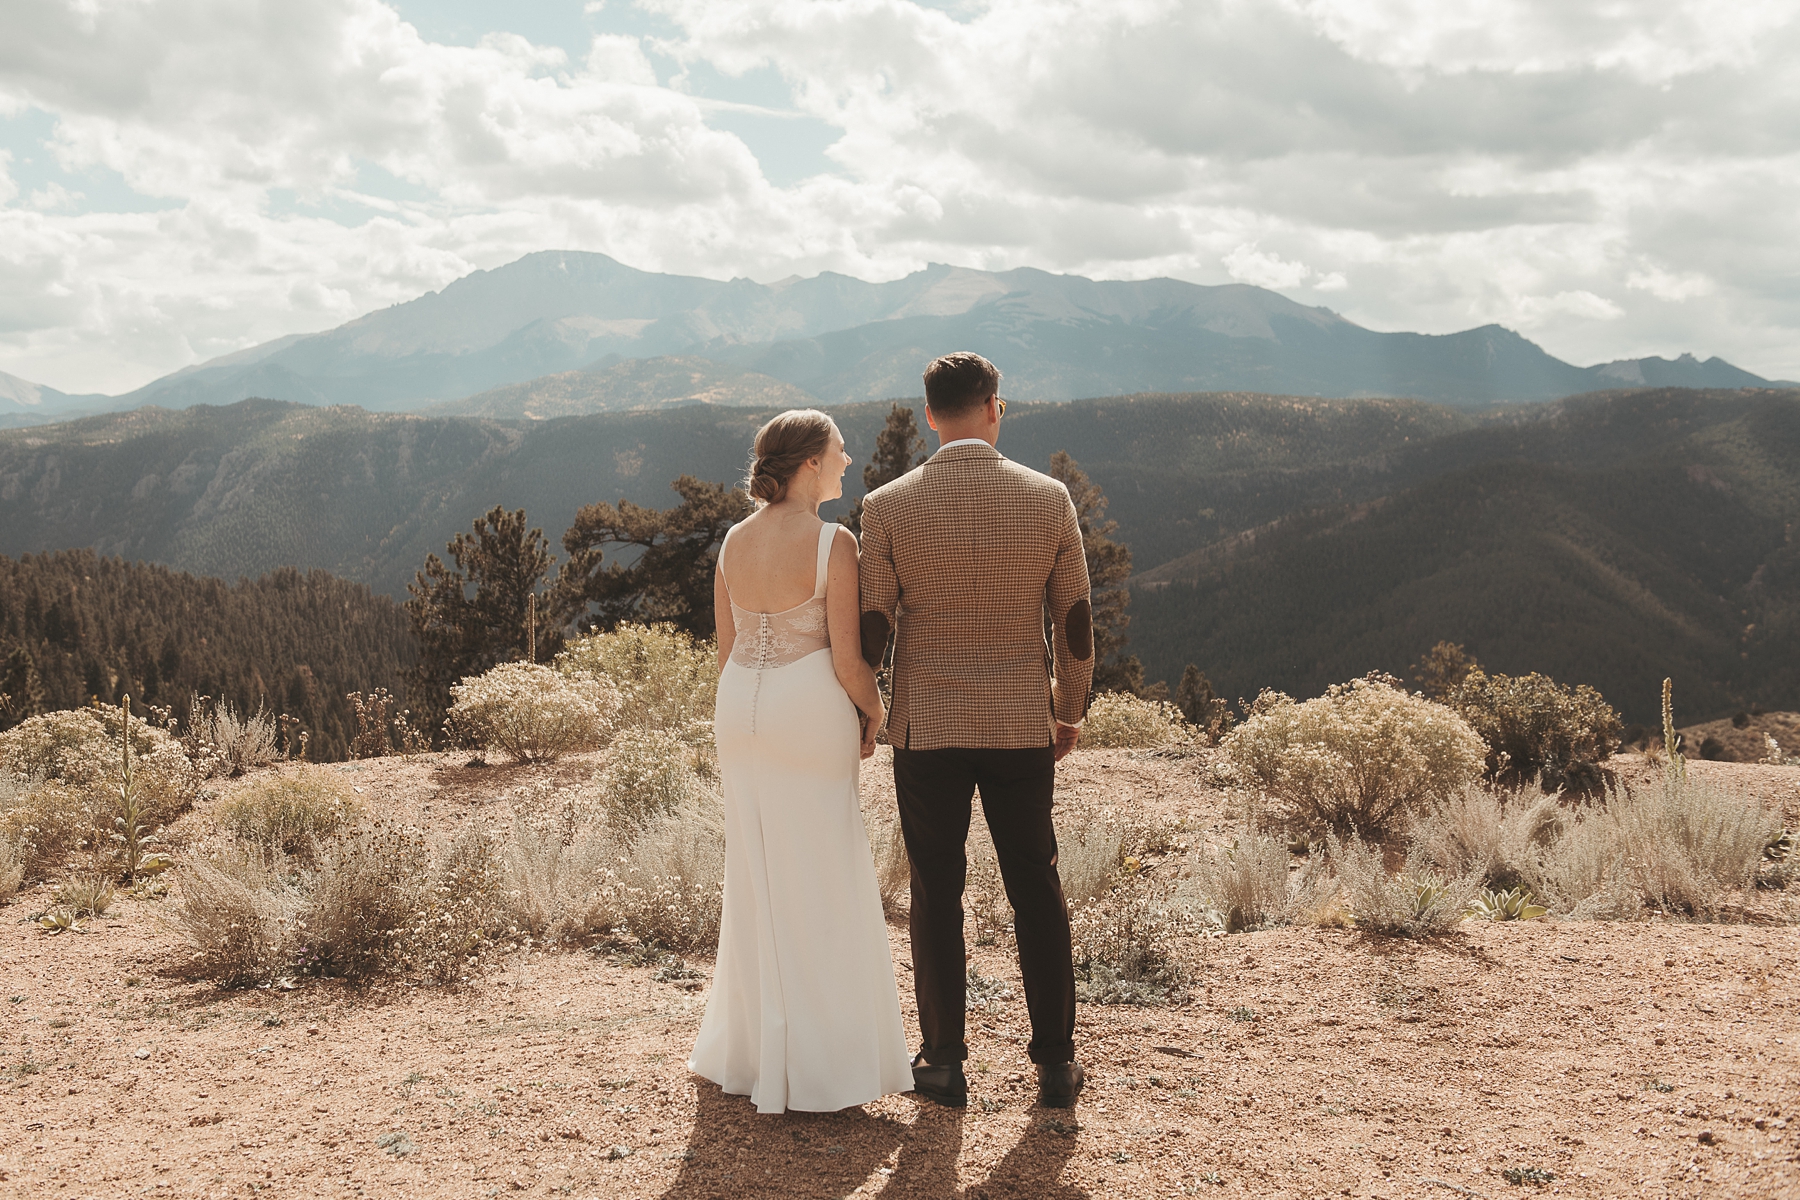 Bride and groom holding hands and looking out at mountains at Airbnb wedding venue in Colorado